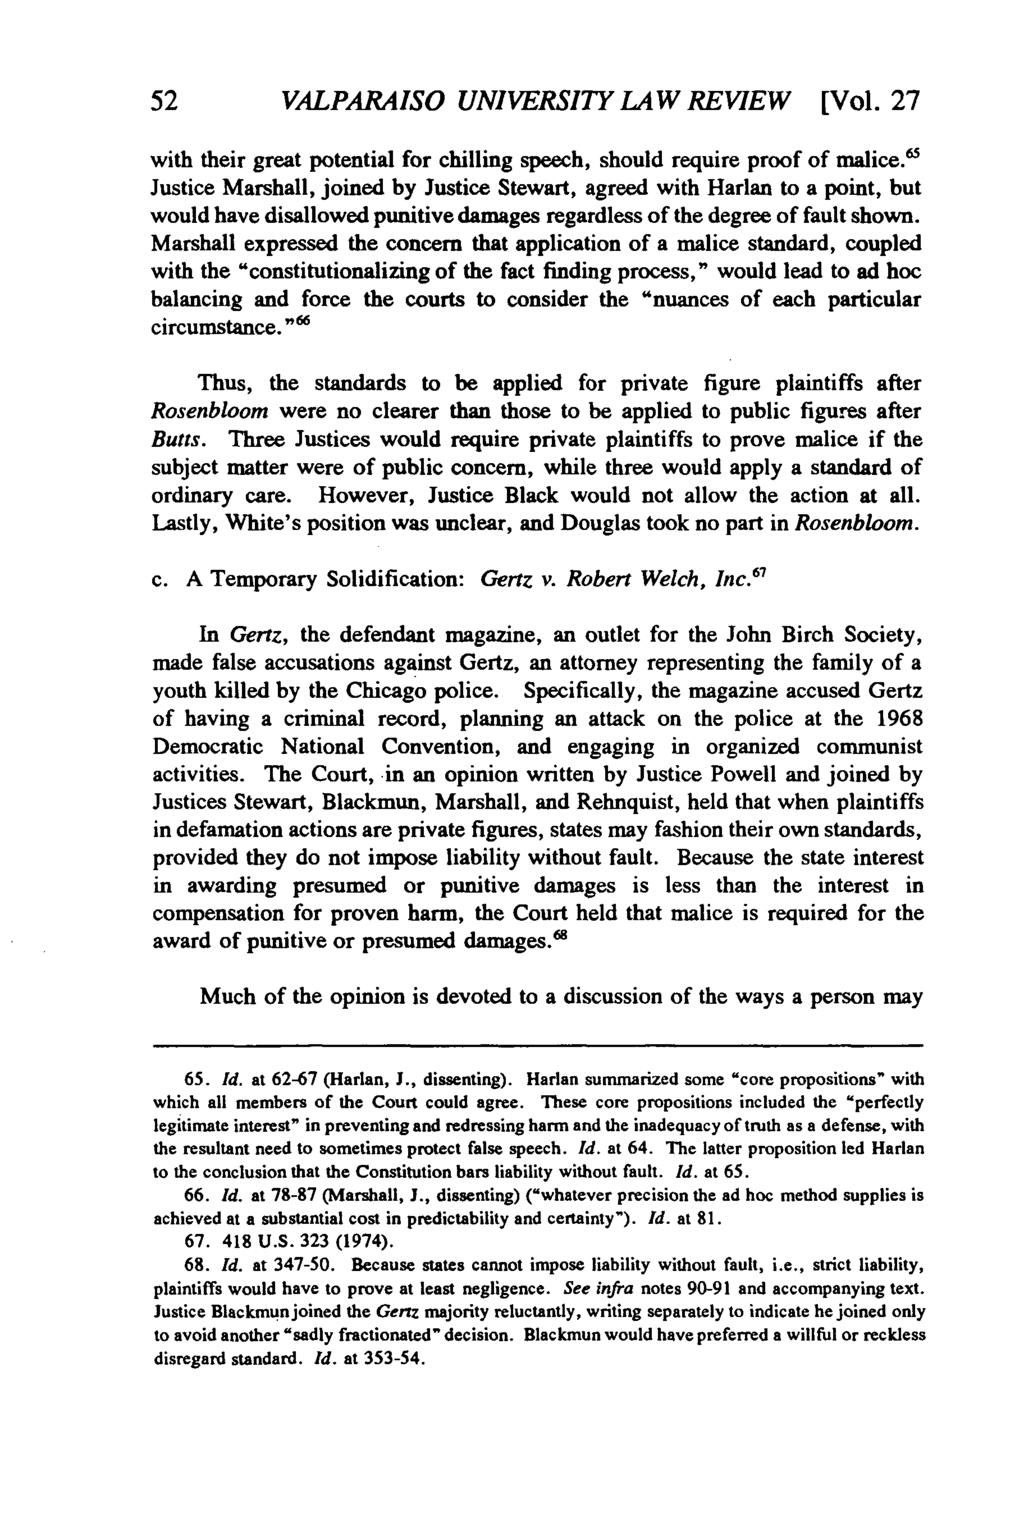 Valparaiso University Law Review, Vol. 27, No. 1 [1992], Art. 2 52 VALPARAISO UNIVERSITY LAW REVIEW [Vol. 27 with their great potential for chilling speech, should require proof of malice.